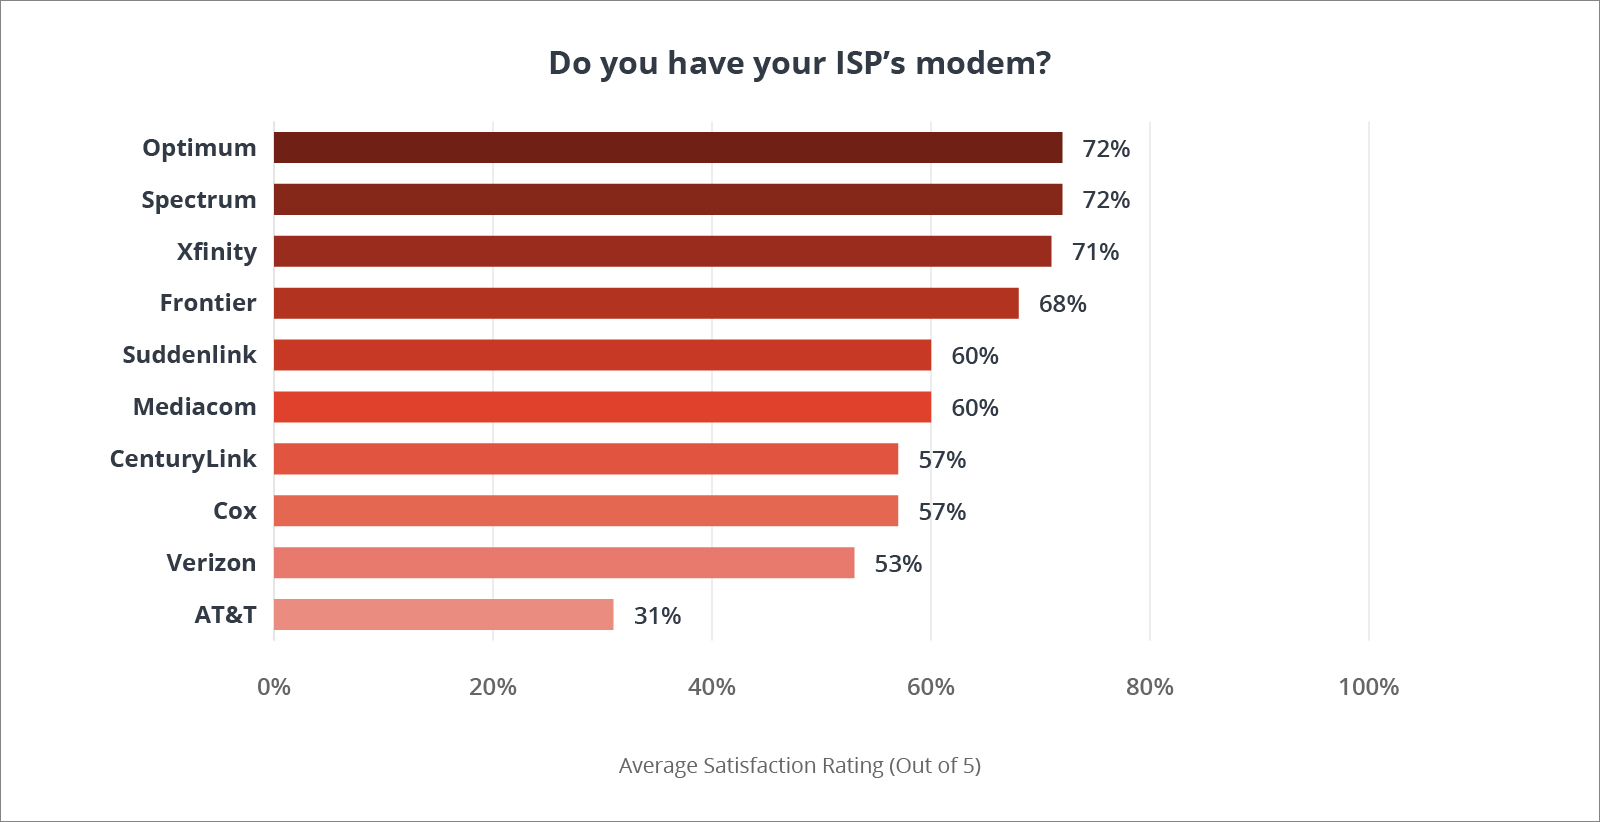 Chart ranking providers based on question, "Do you have your ISP's modem?"